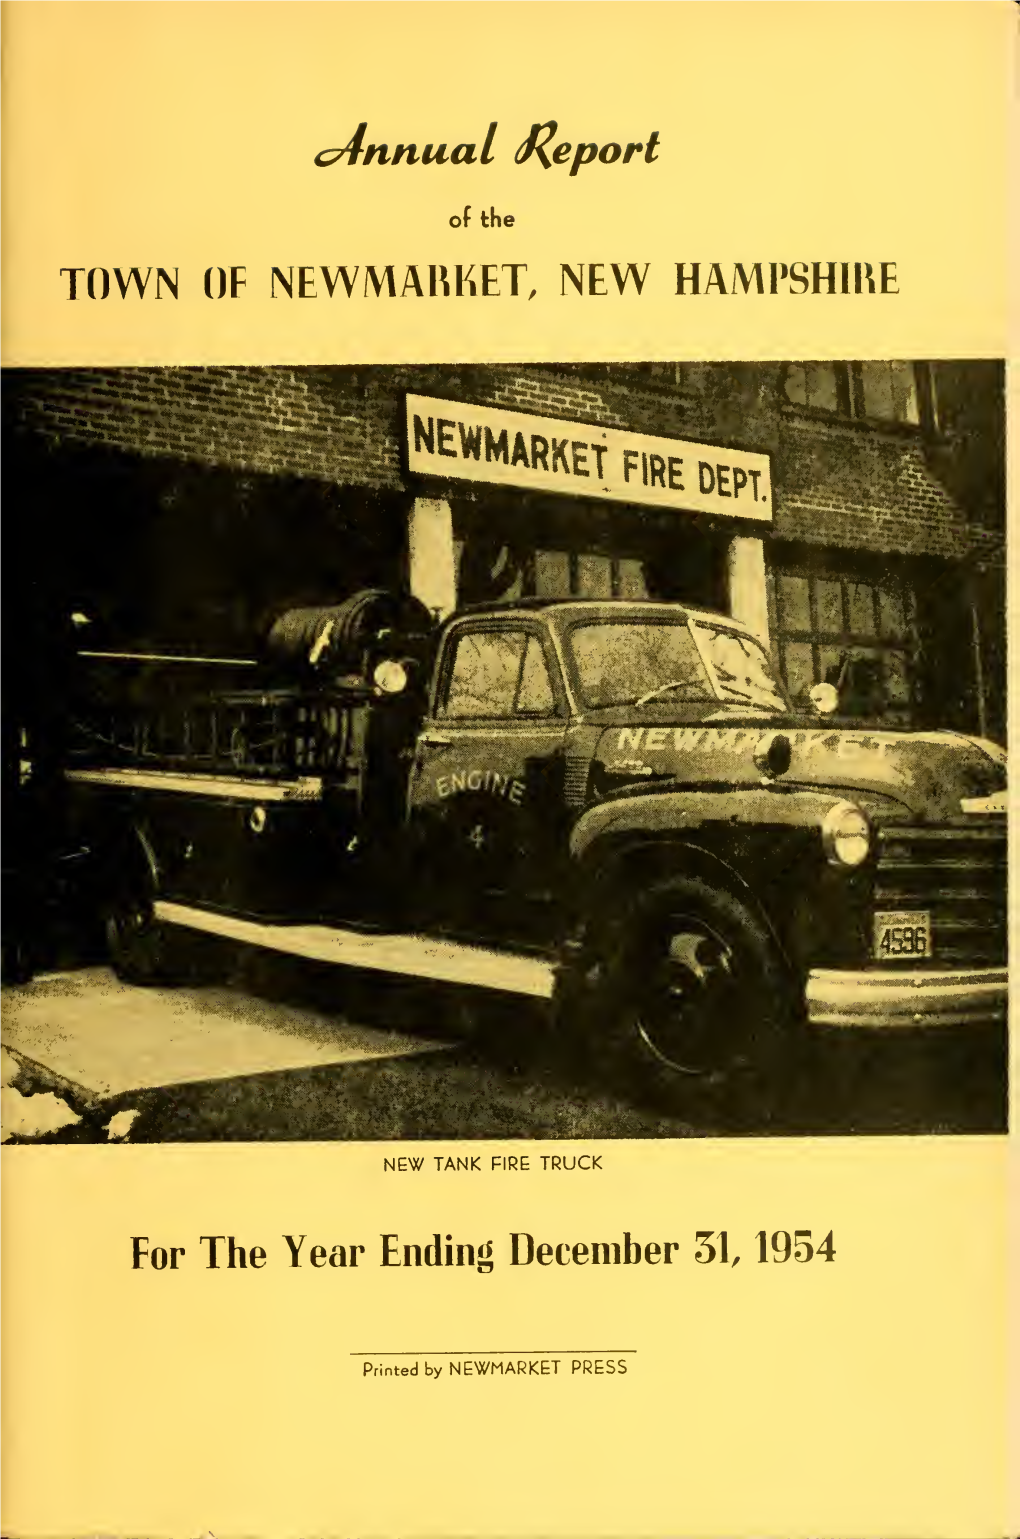 Annual Report of the Town of Newmarket by the Selectmen, Town